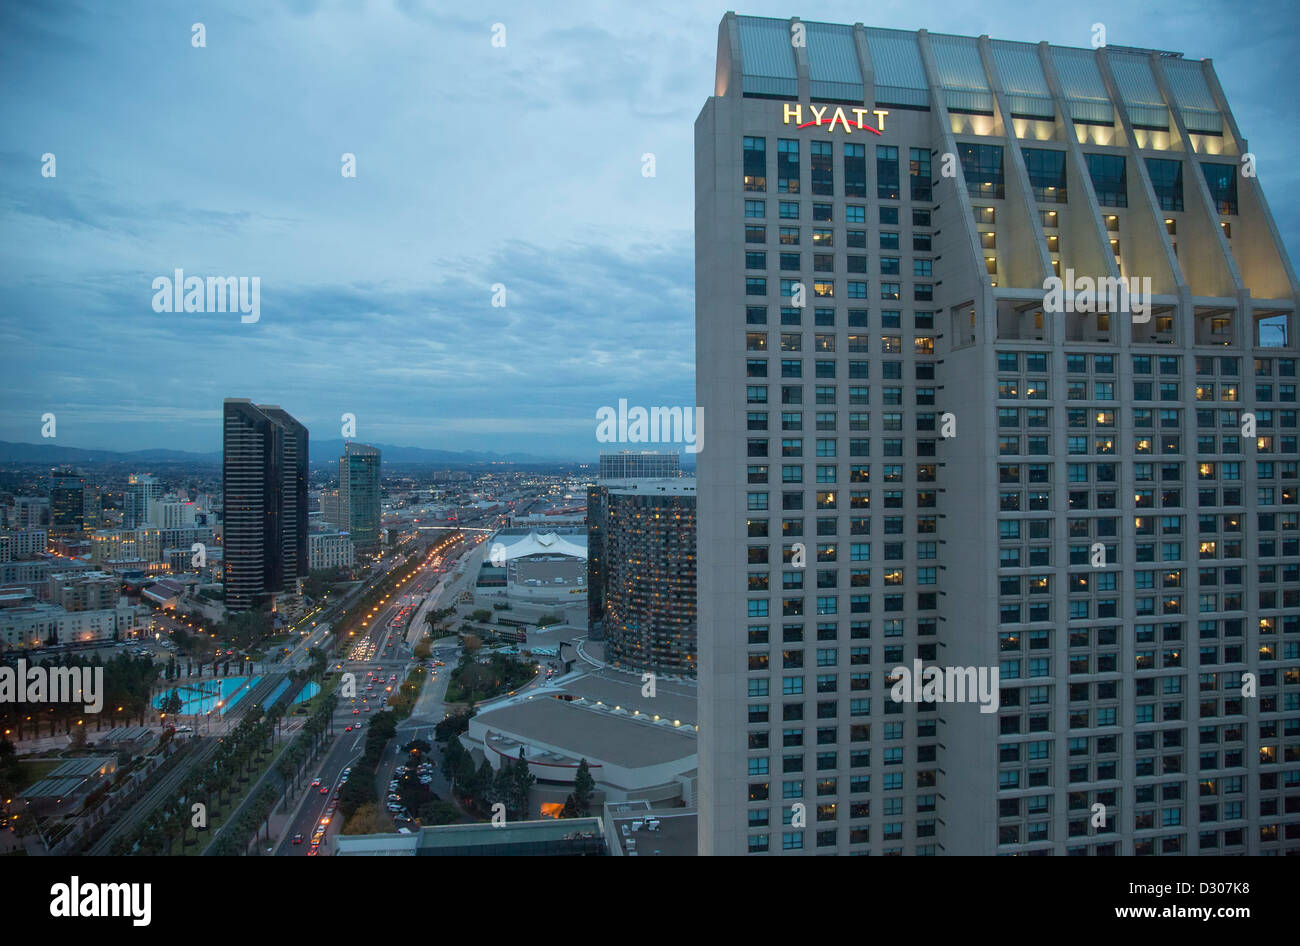 San Diego, California - The Manchester Grand Hyatt hotel and downtown San Diego. Stock Photo